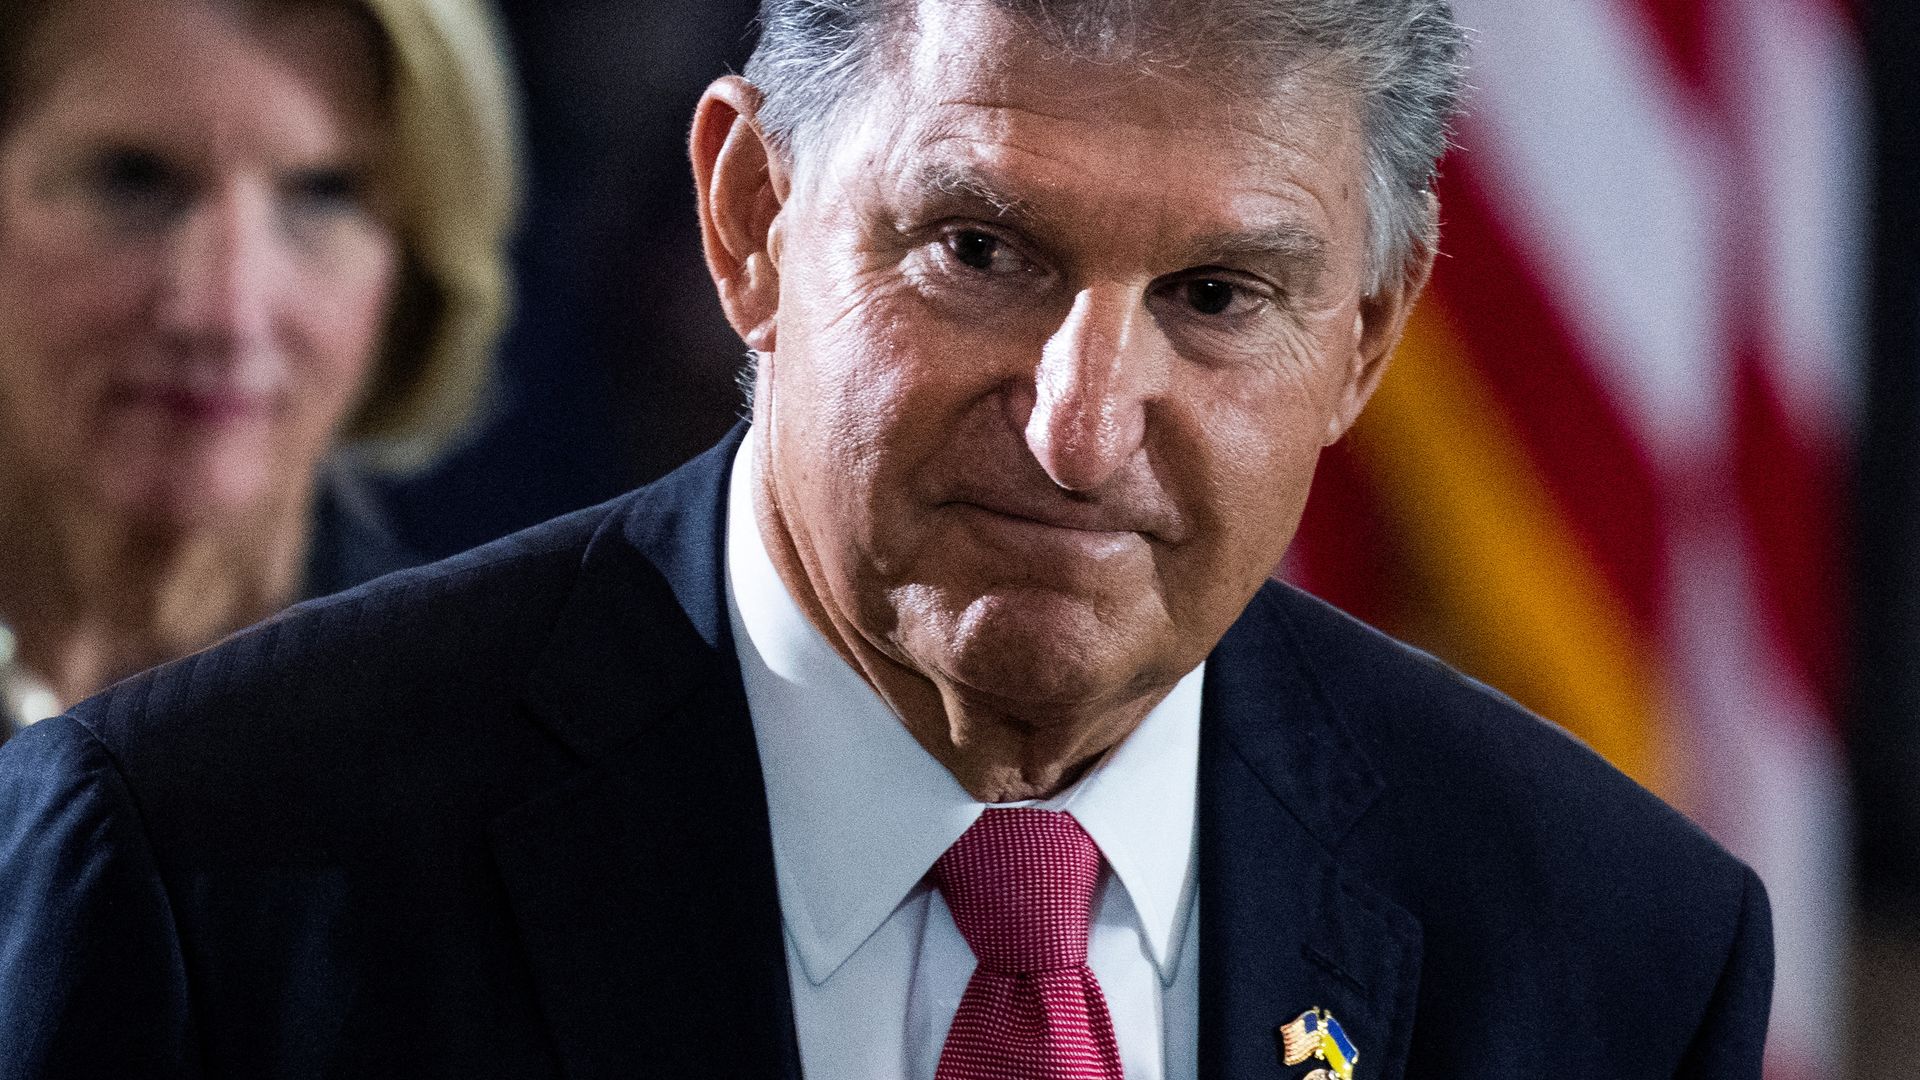 Republicans in West Virginia are reaching out to Democratic Sen. Joe Manchin, encouraging him to run for governor.